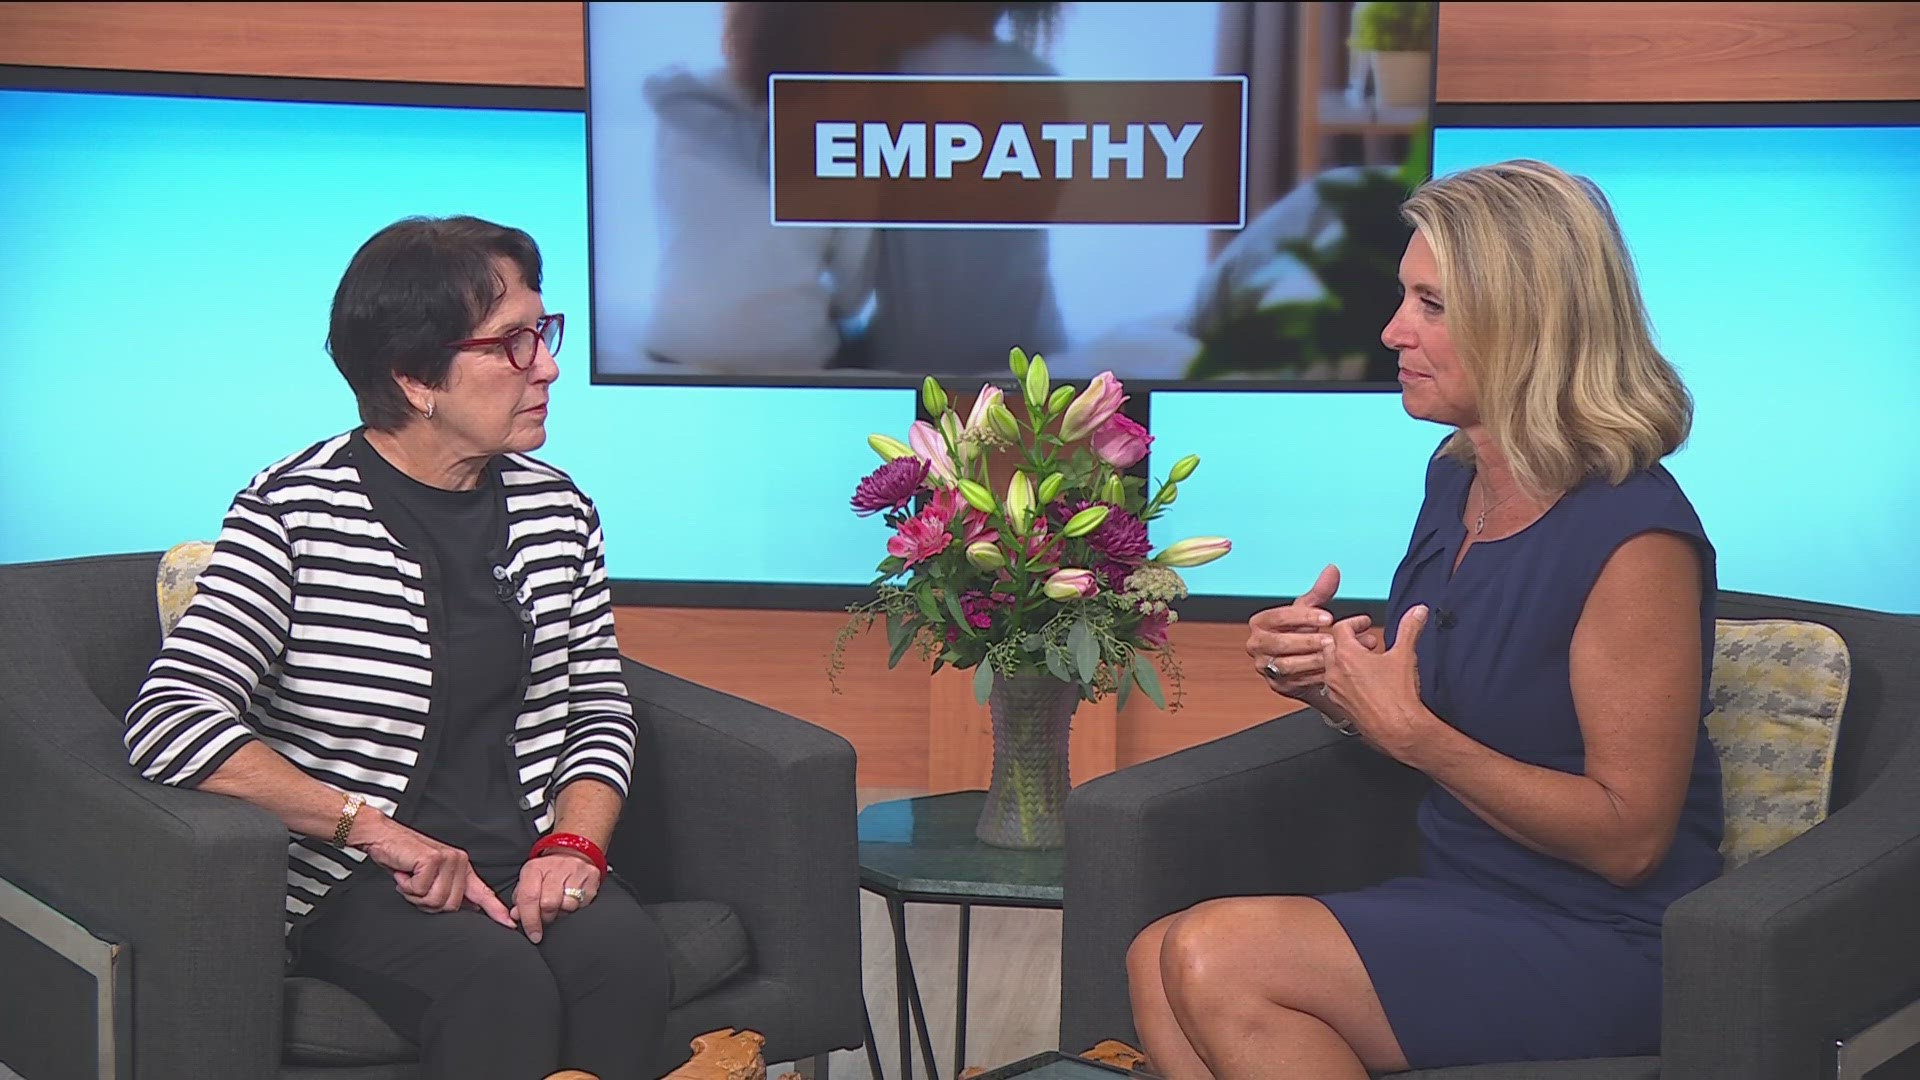 Developmental psychologist and podcast host Dr. Marti Erickson says empathy is key to caring and respect.